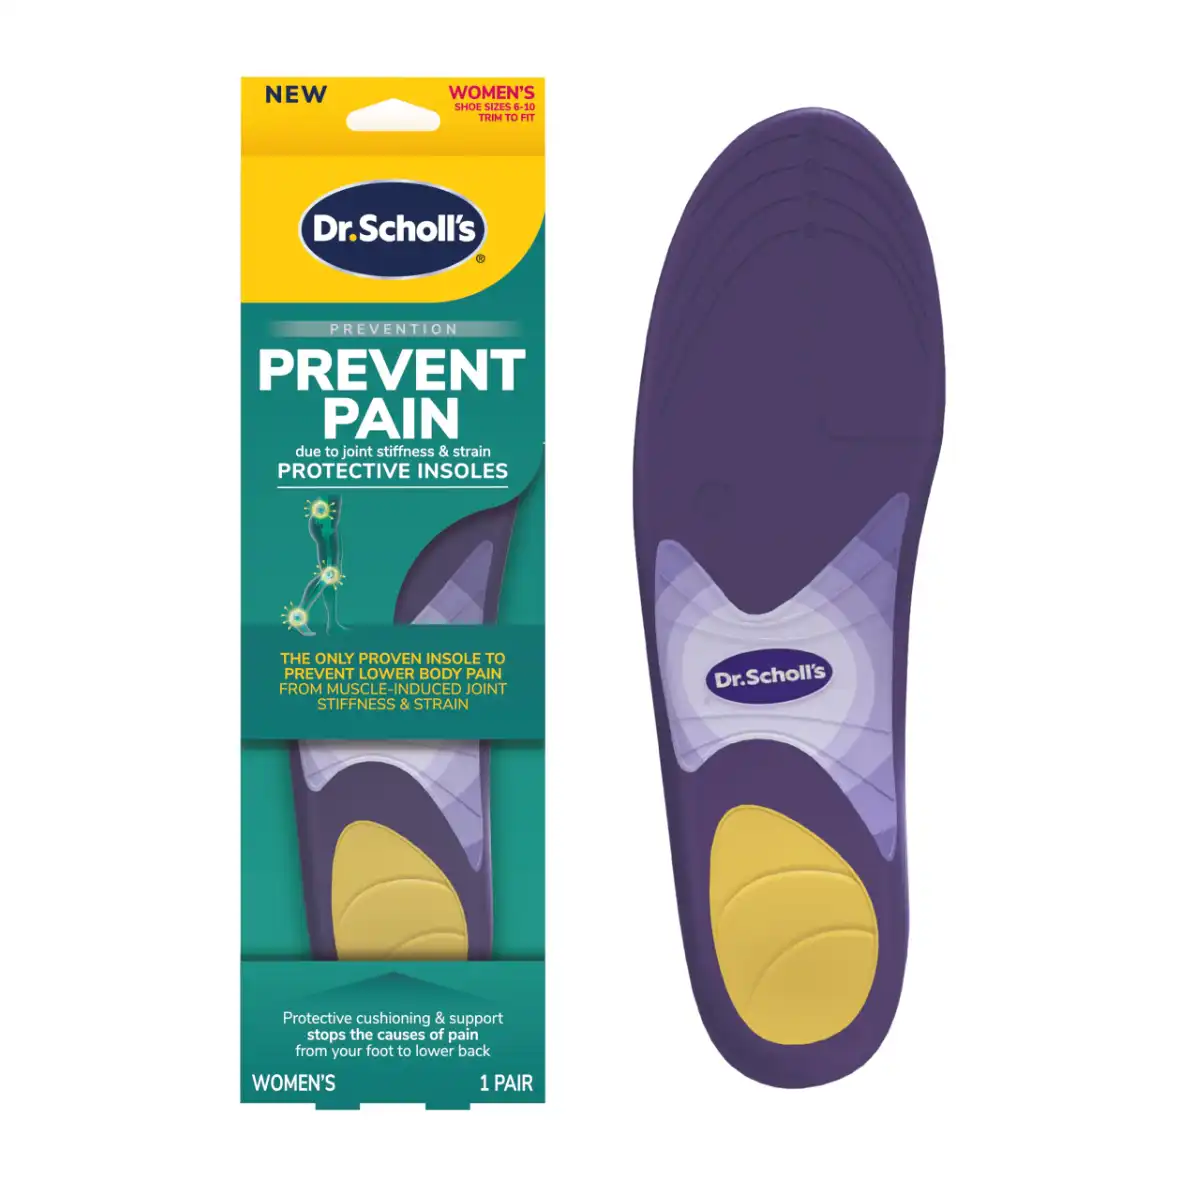 Best Insoles for Knee and Back Pain drscholl
